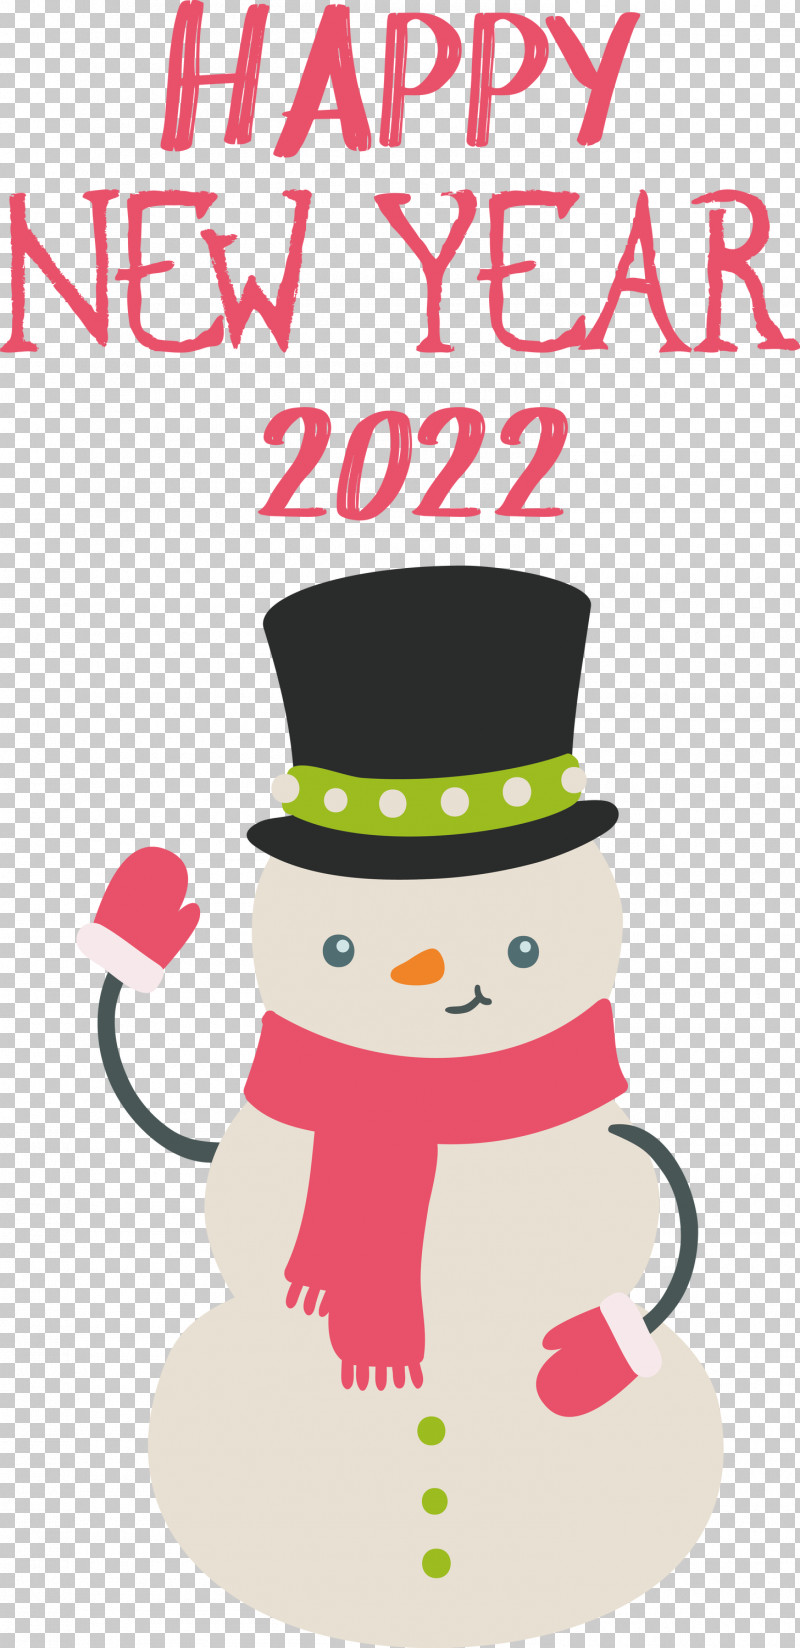 Happy New Year 2022 2022 New Year 2022 PNG, Clipart, Bauble, Cartoon, Character, Christmas Day, Christmas Tree Free PNG Download